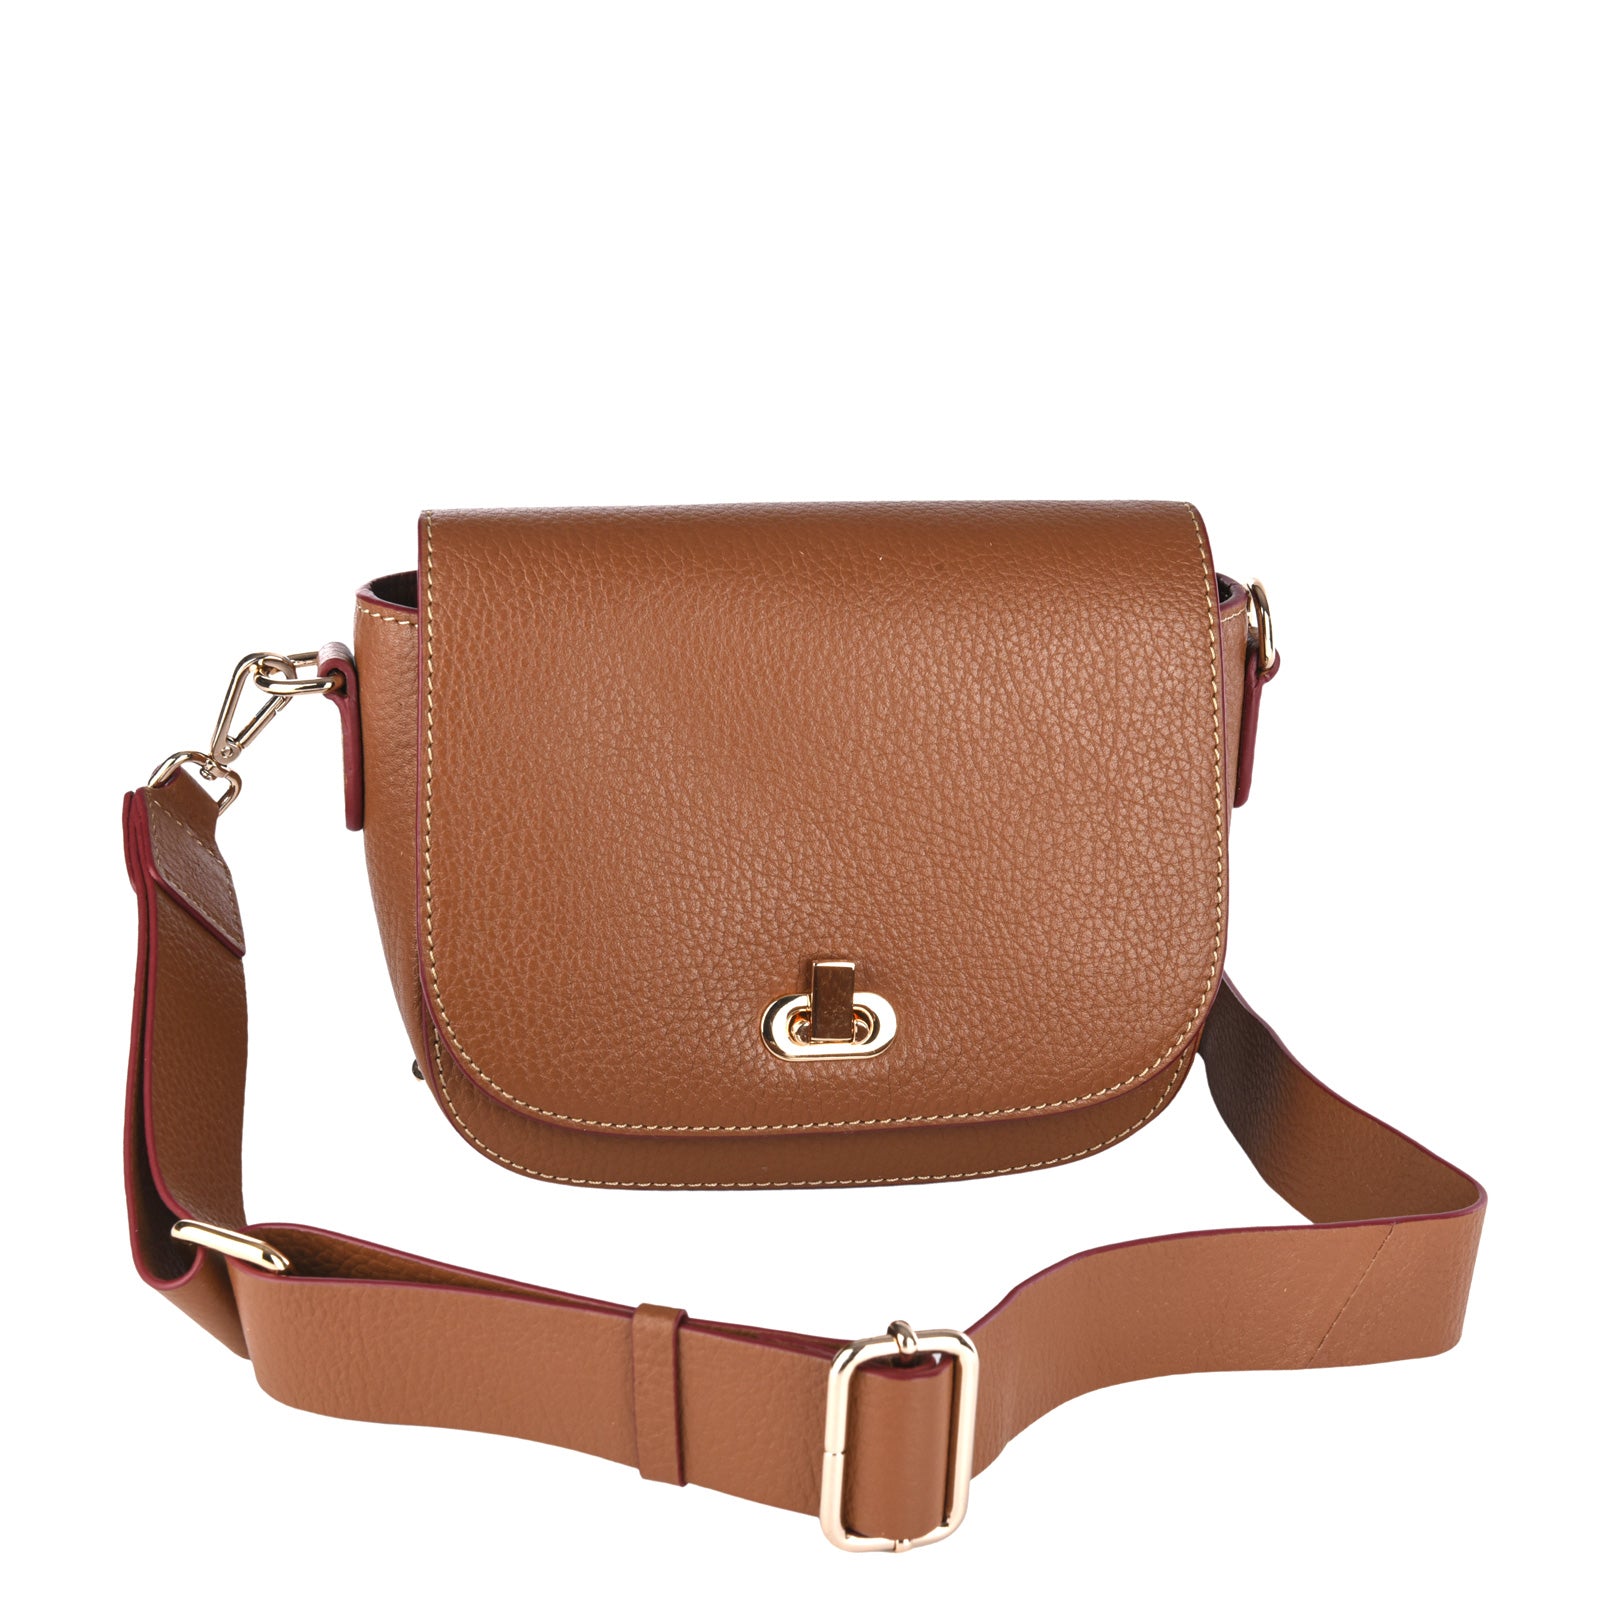 MARNIE - Grained leather messenger bag